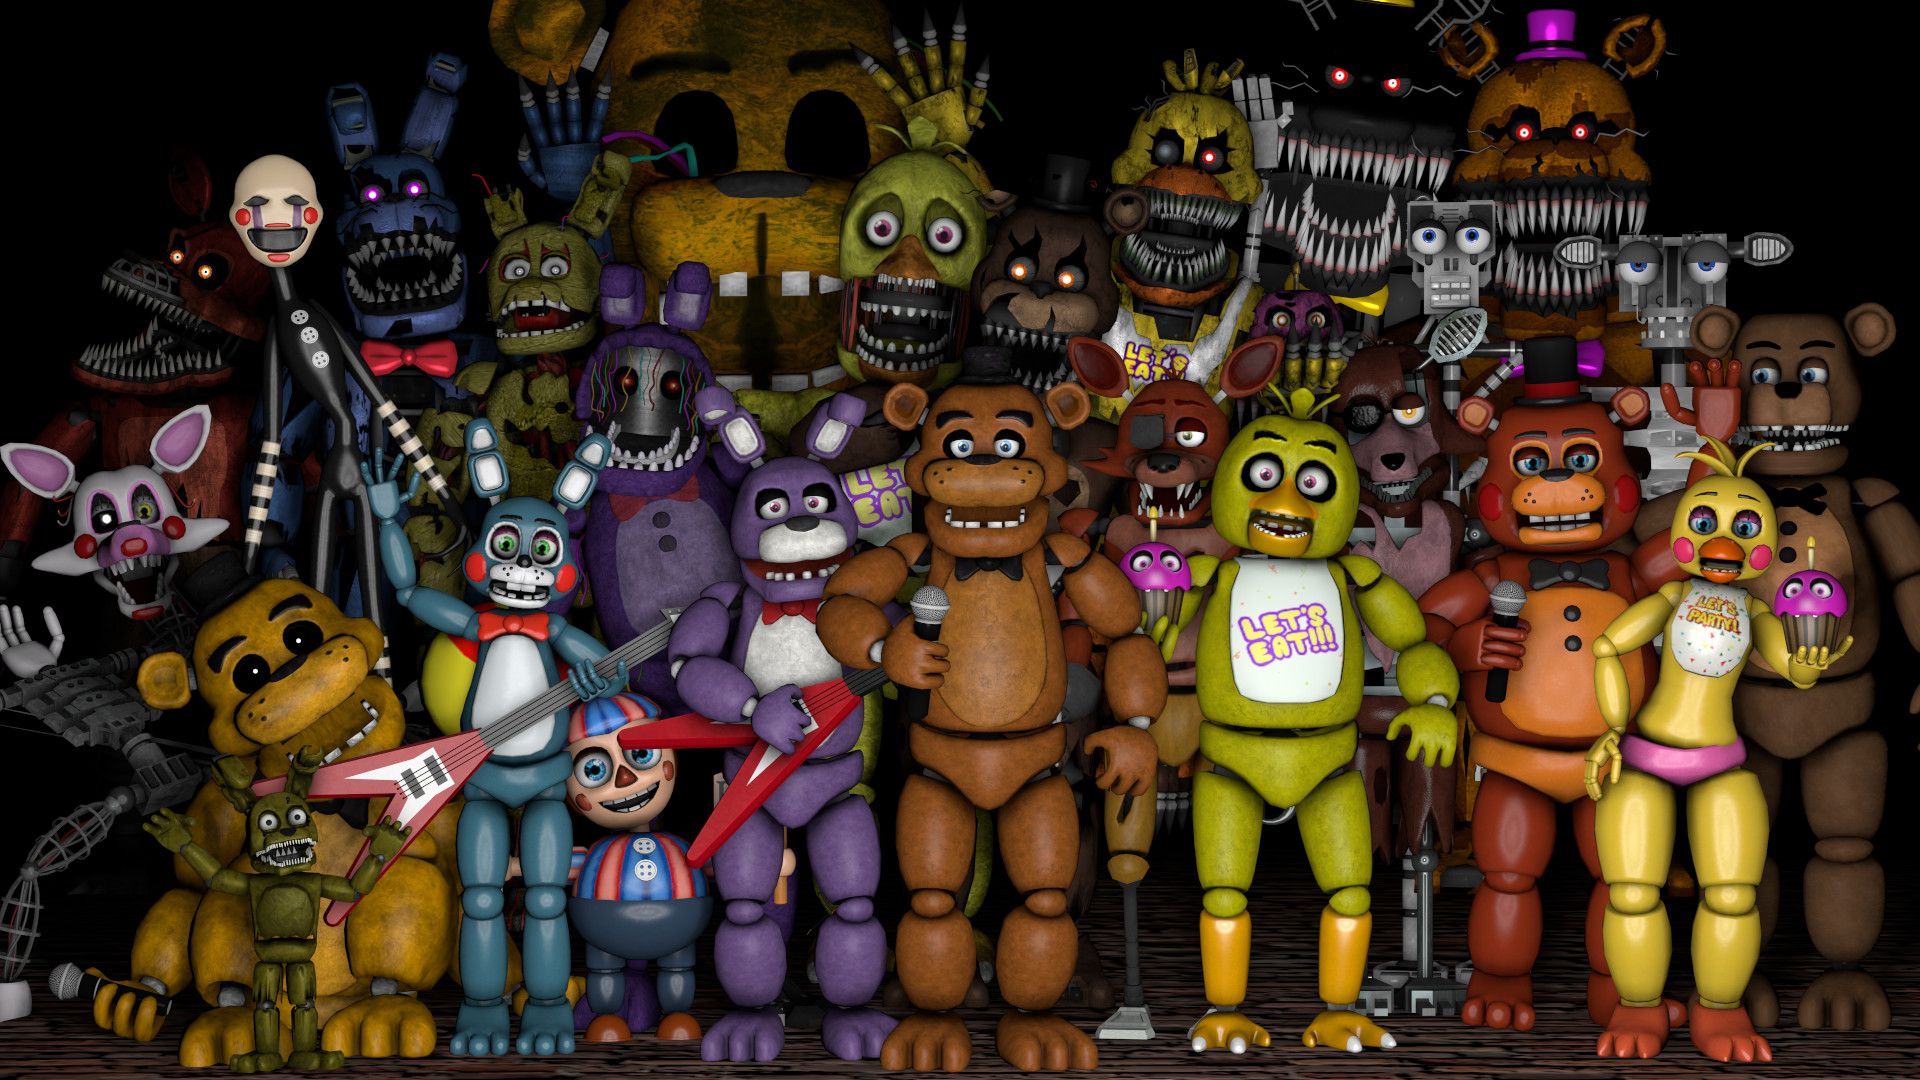 Five Nights at Freddy's wallpaper - Game wallpapers - #35600